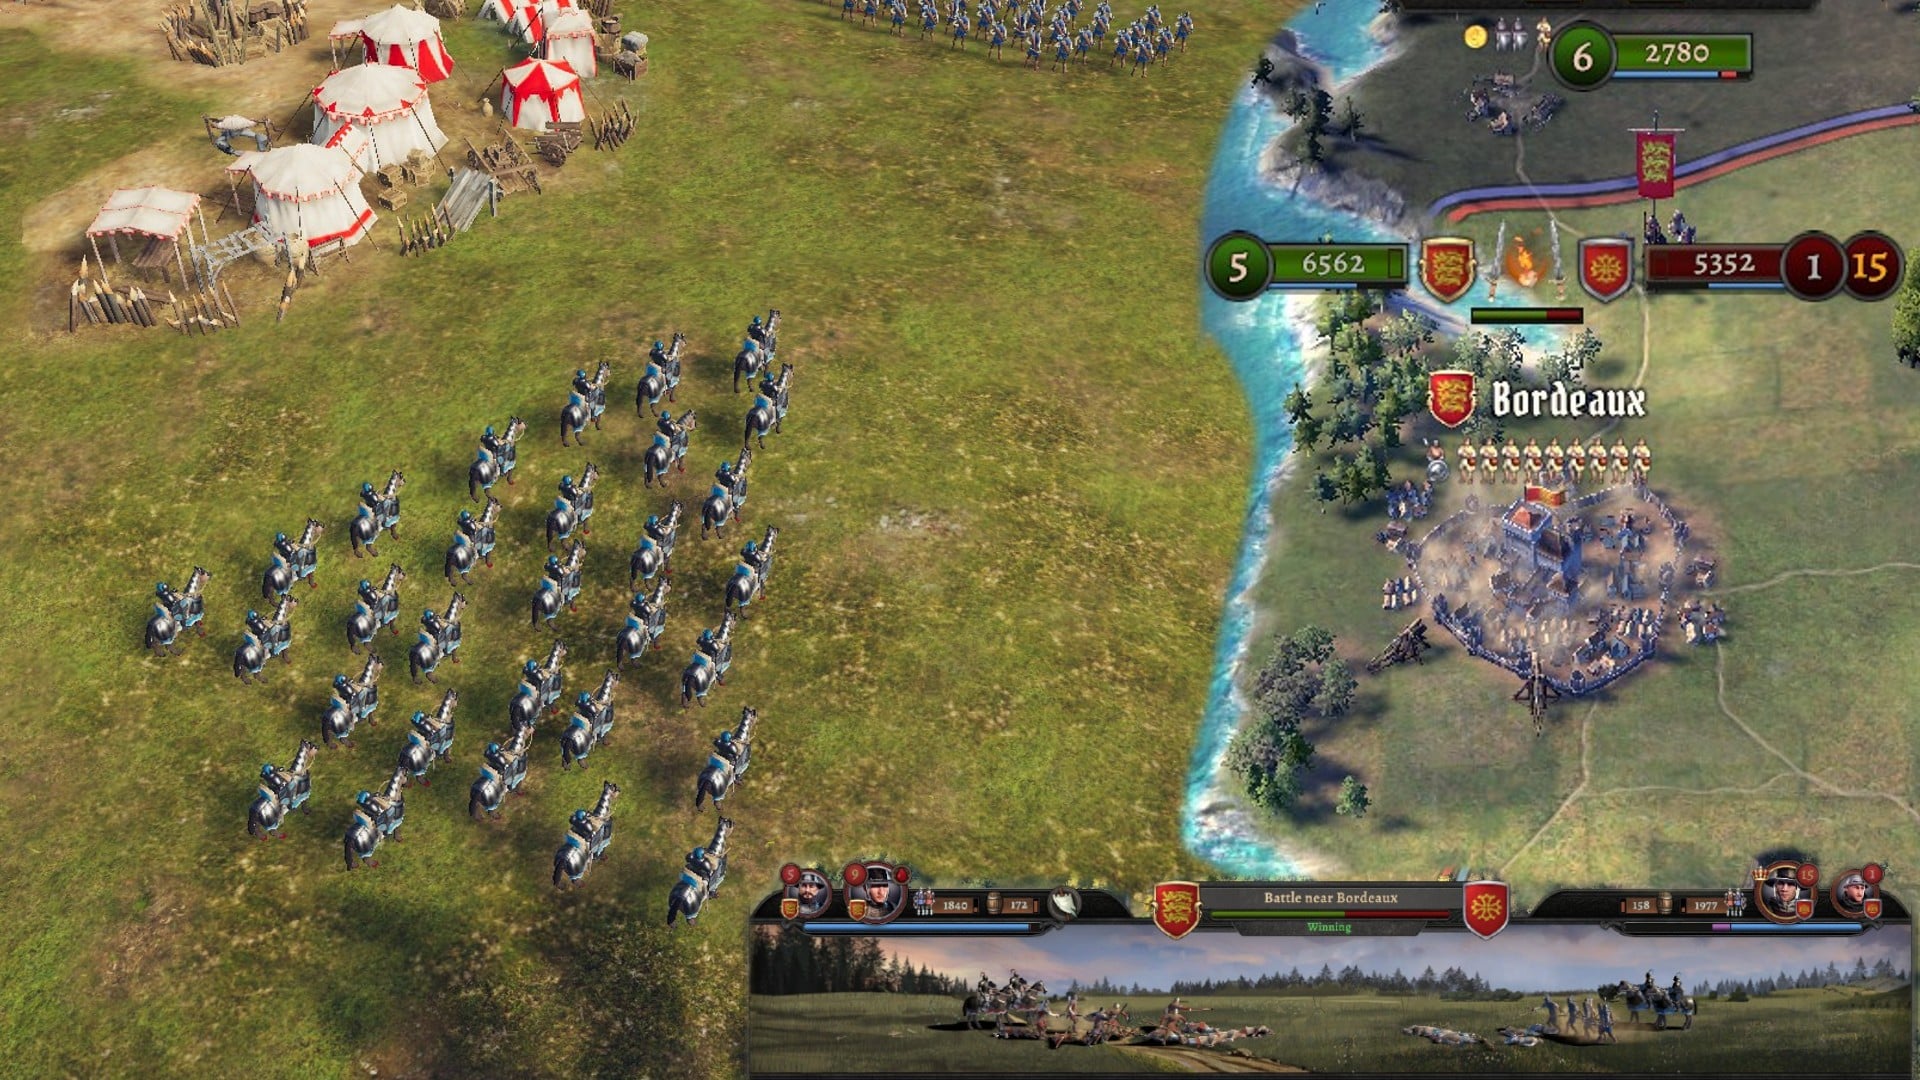 Knights of Honor 2: Sovereign PC Review - Impulse Gamer